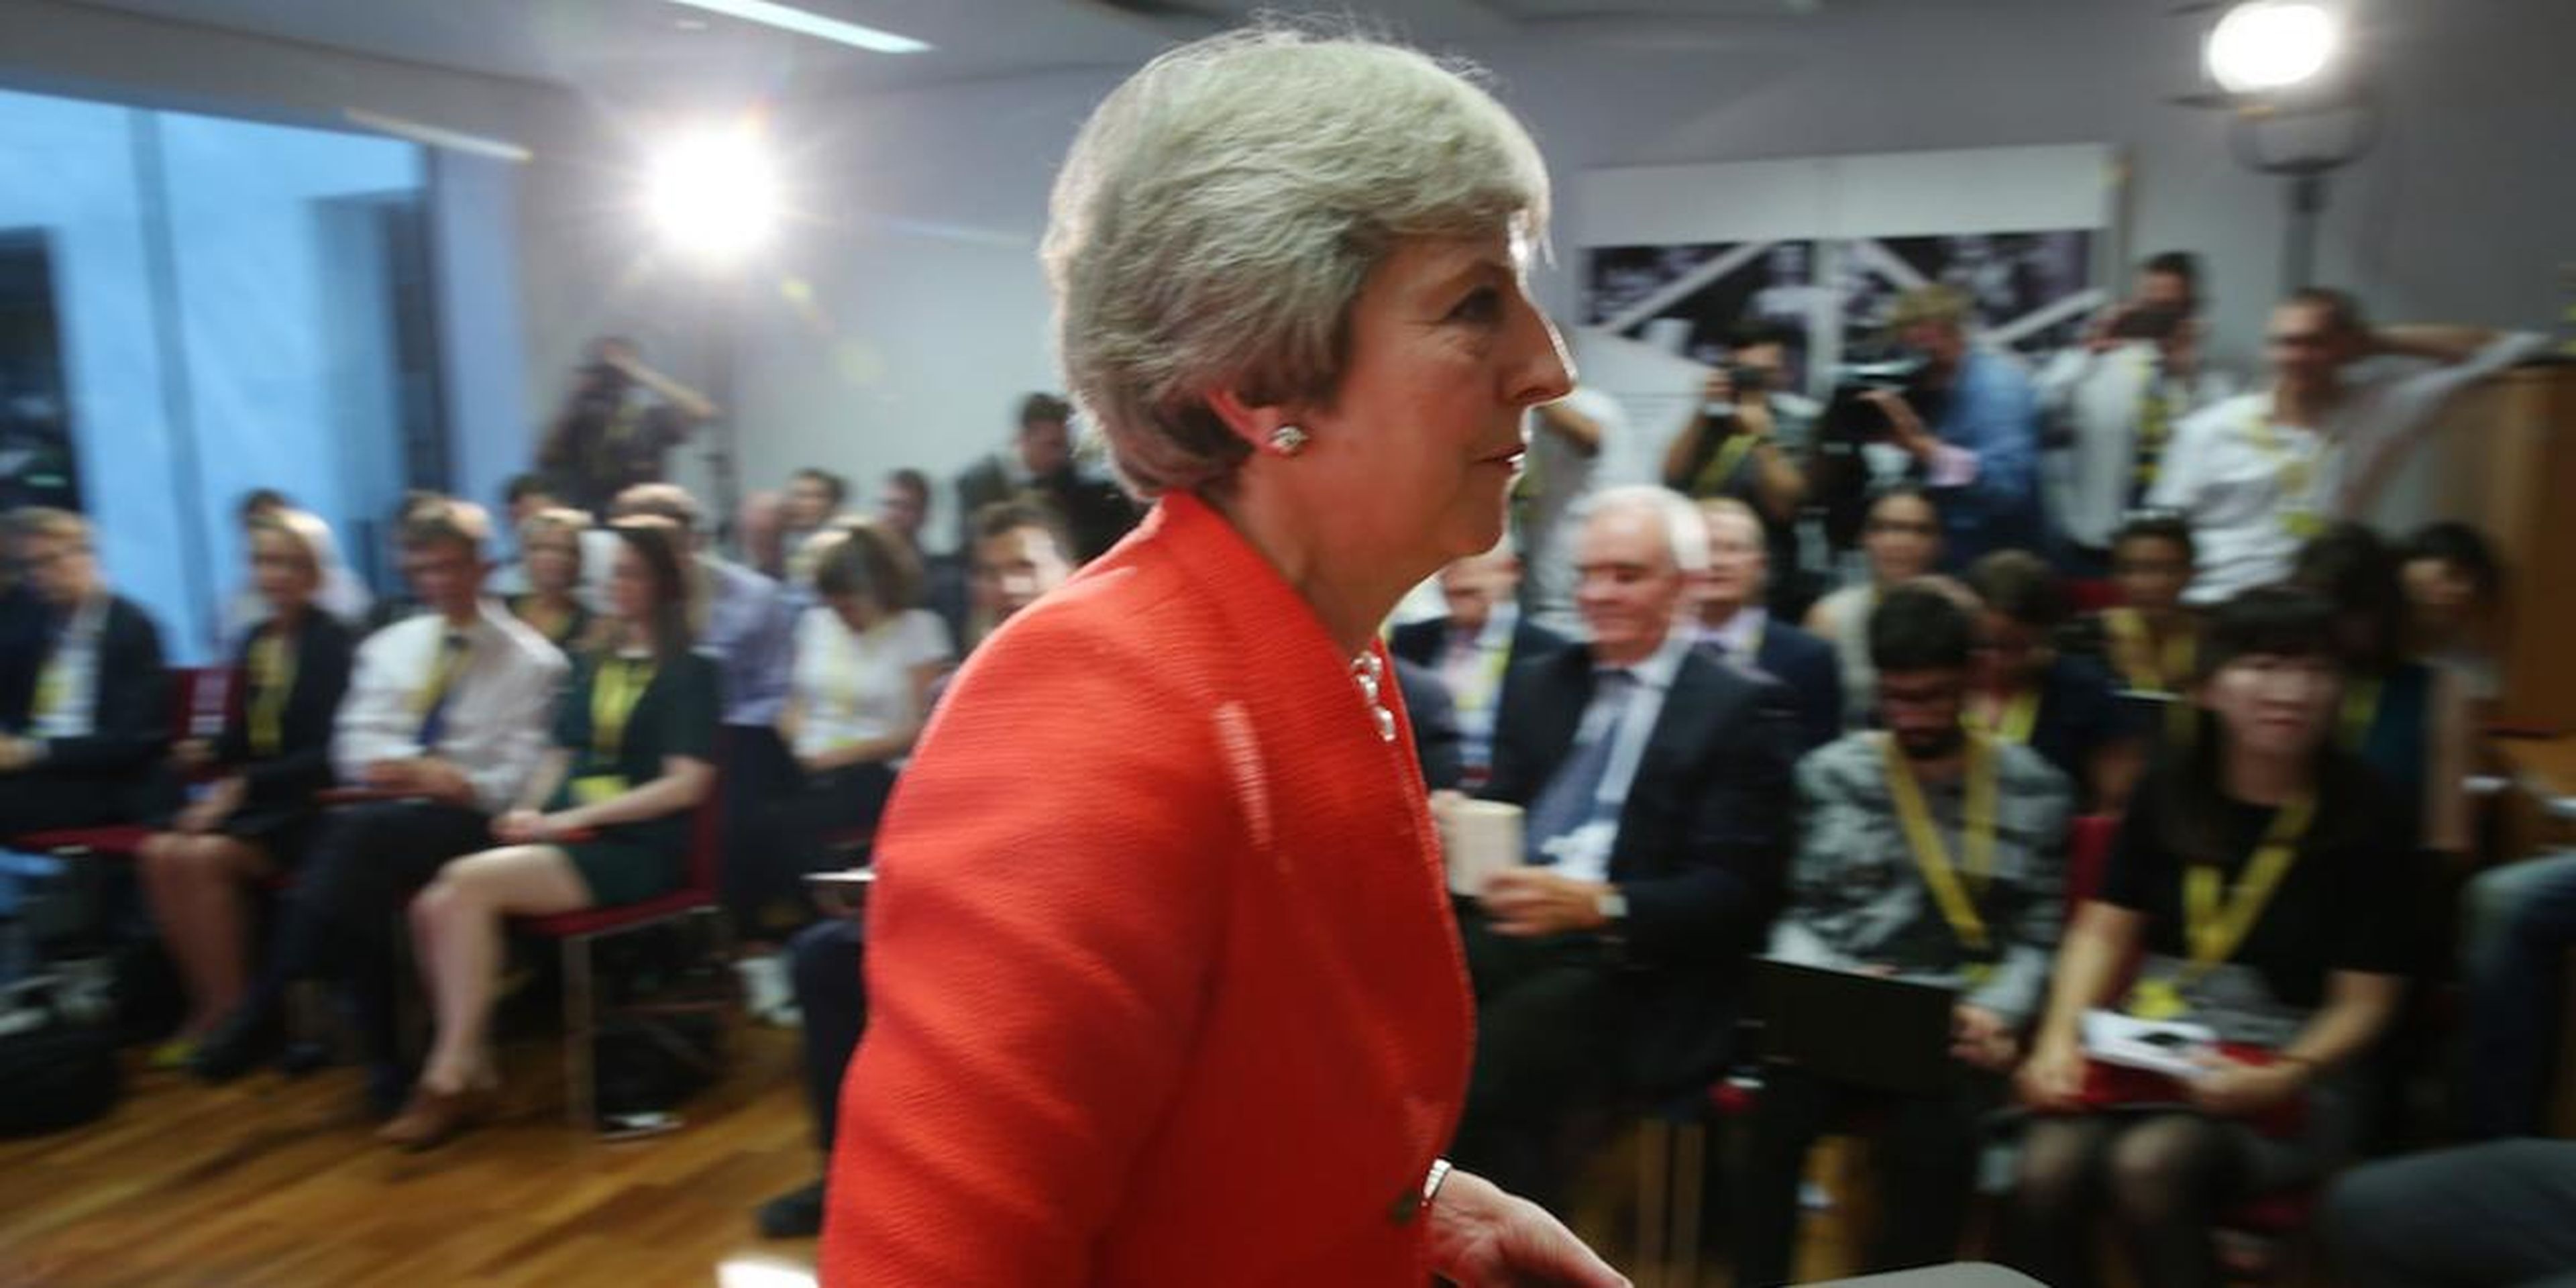 Theresa May's leadership is in crisis after being humiliated by EU leaders